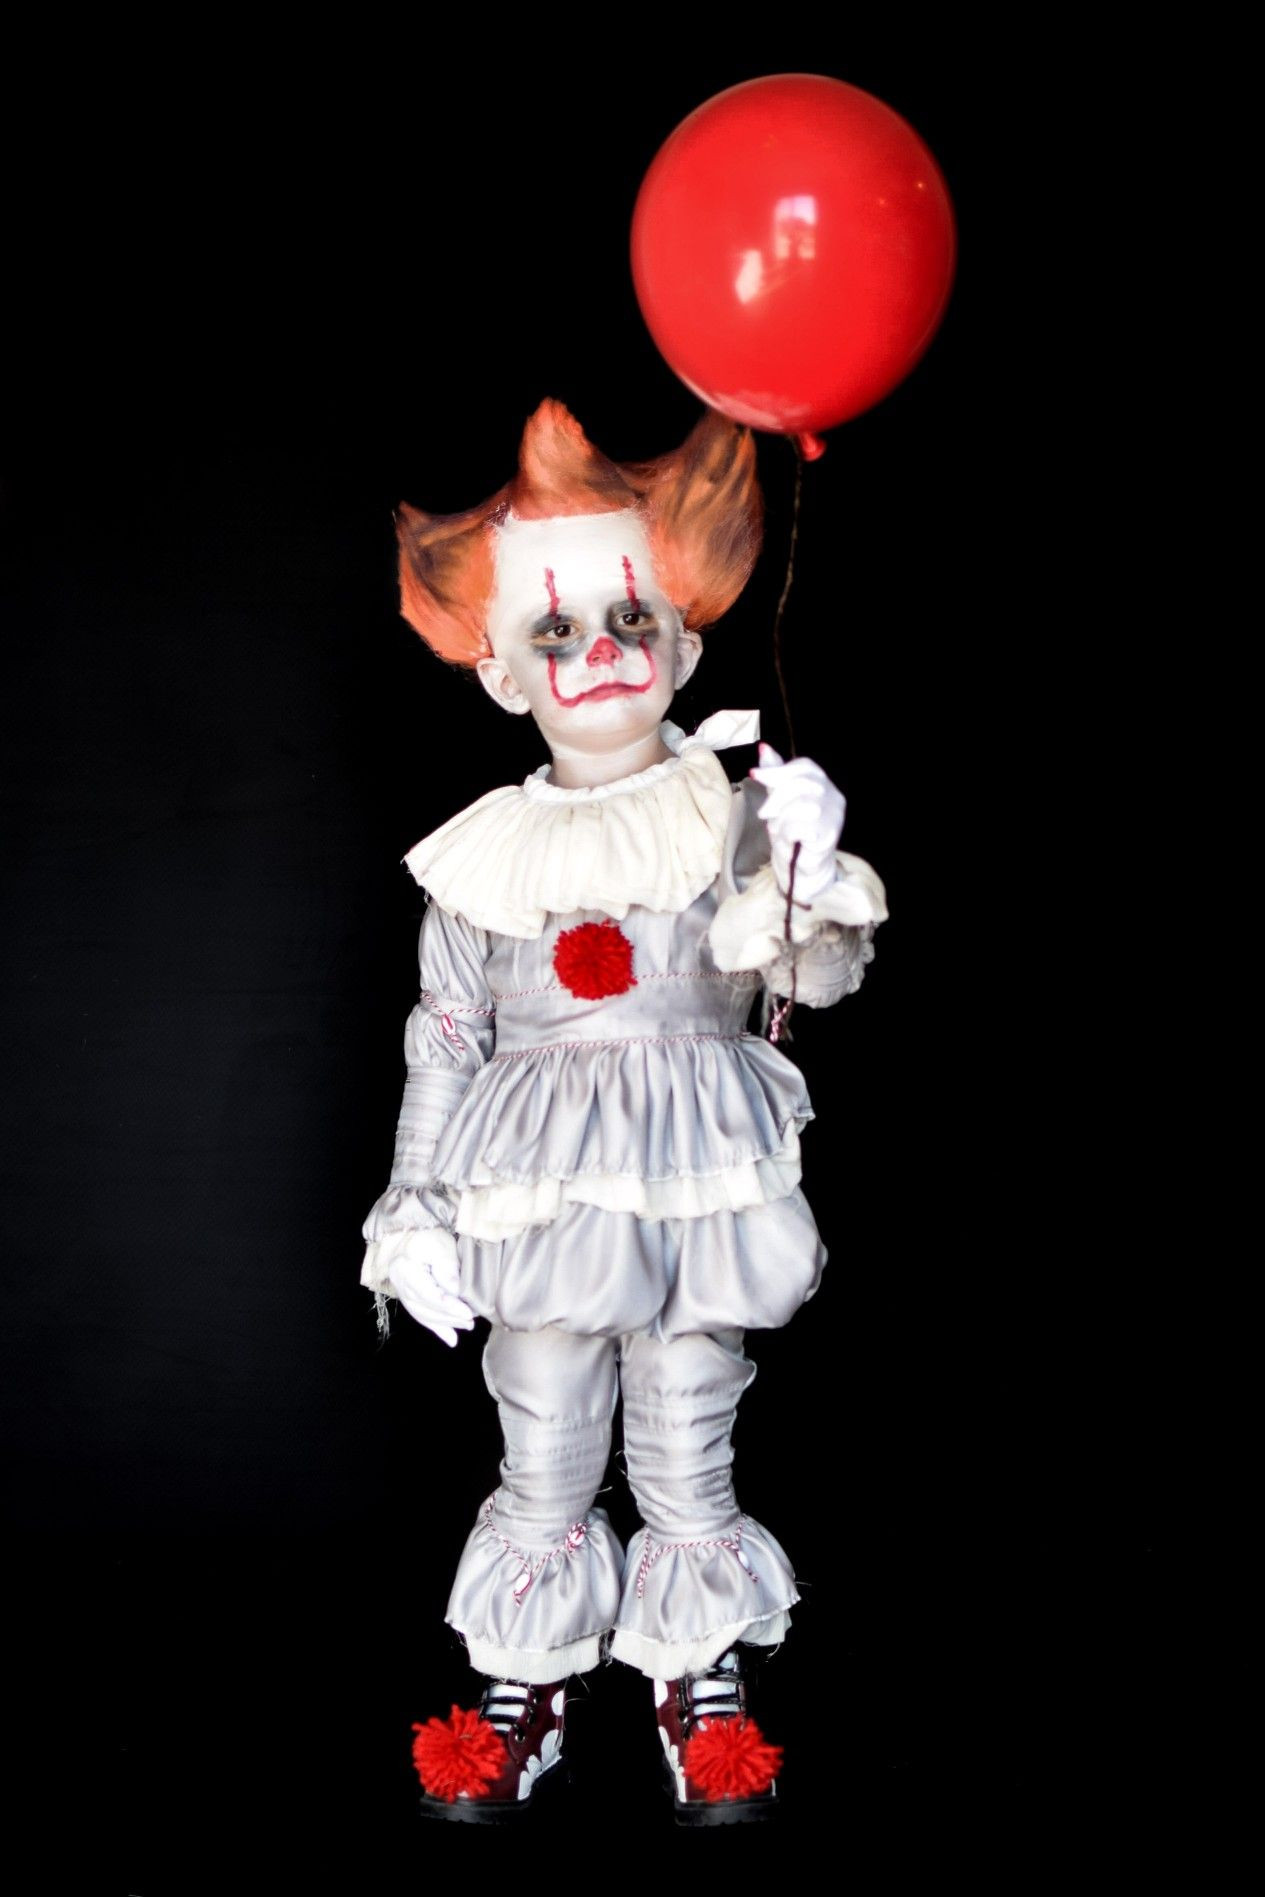 Pennywise Costume DIY
 3 year old turns into pennywise clown from the movie IT